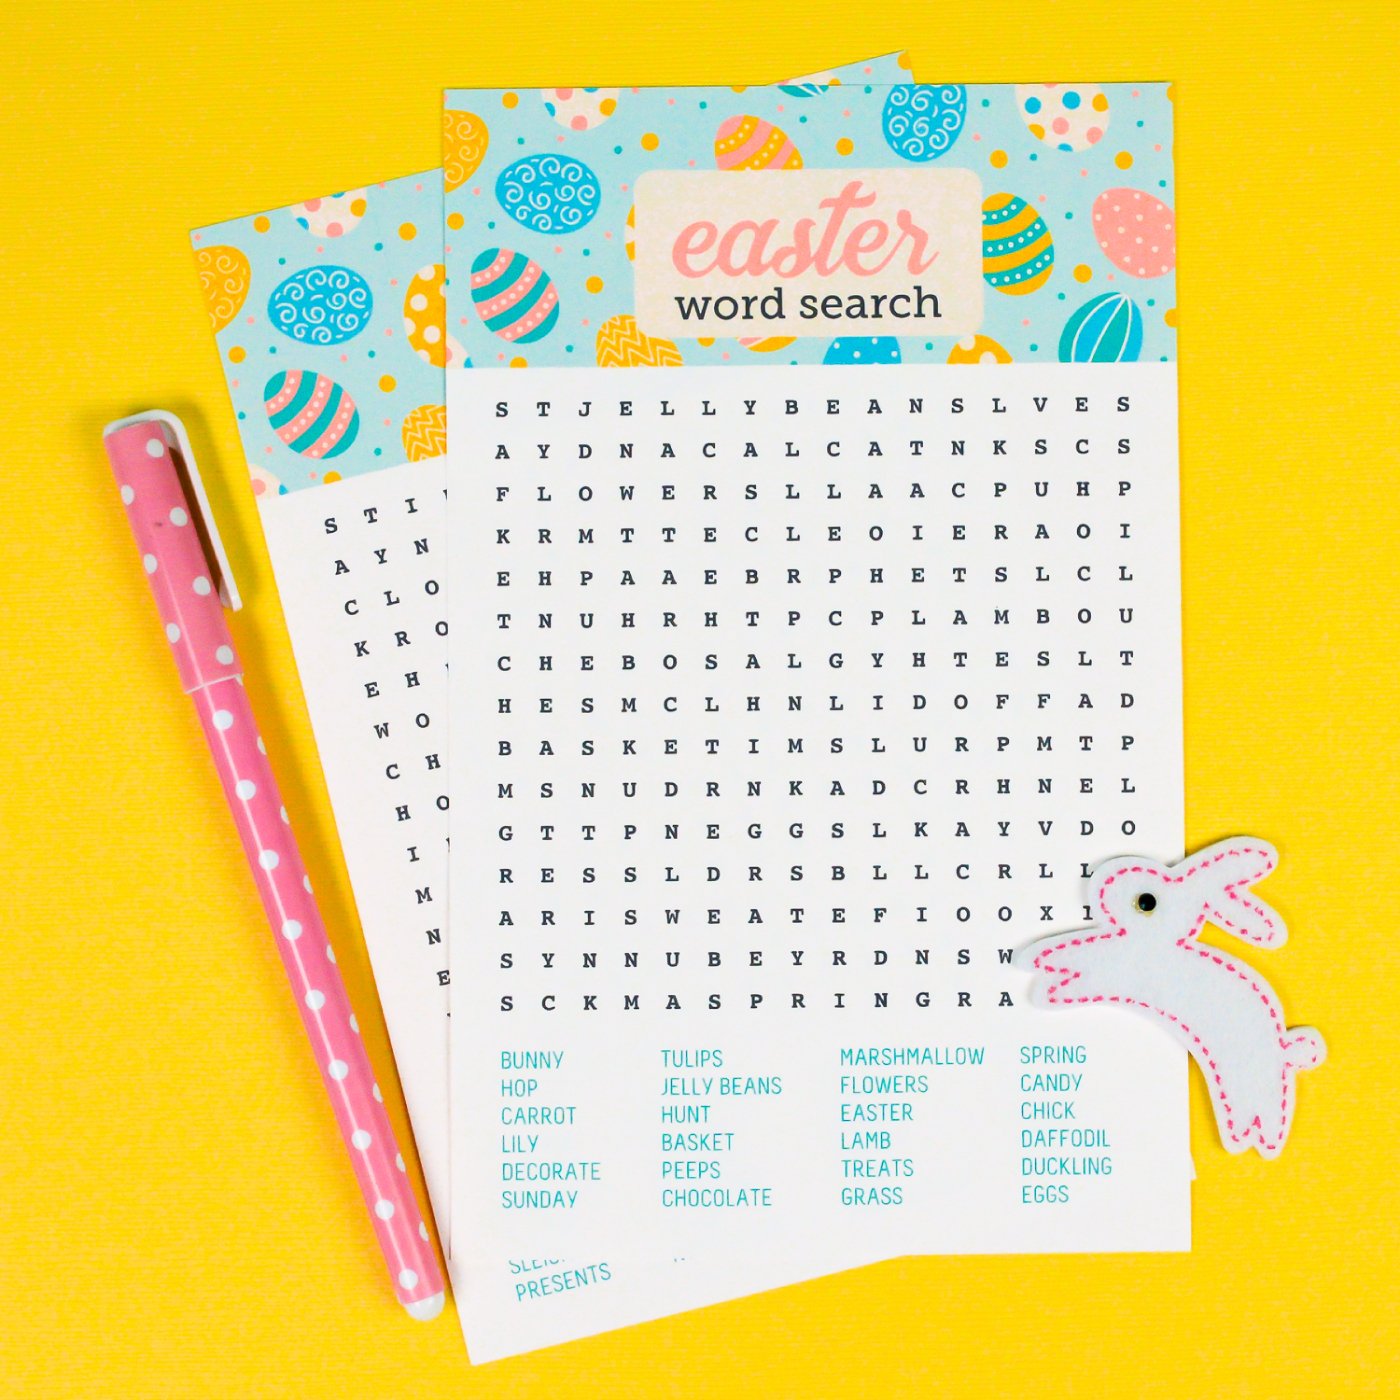 A pink polka dotted pen sitting next to two Easter Word Search papers